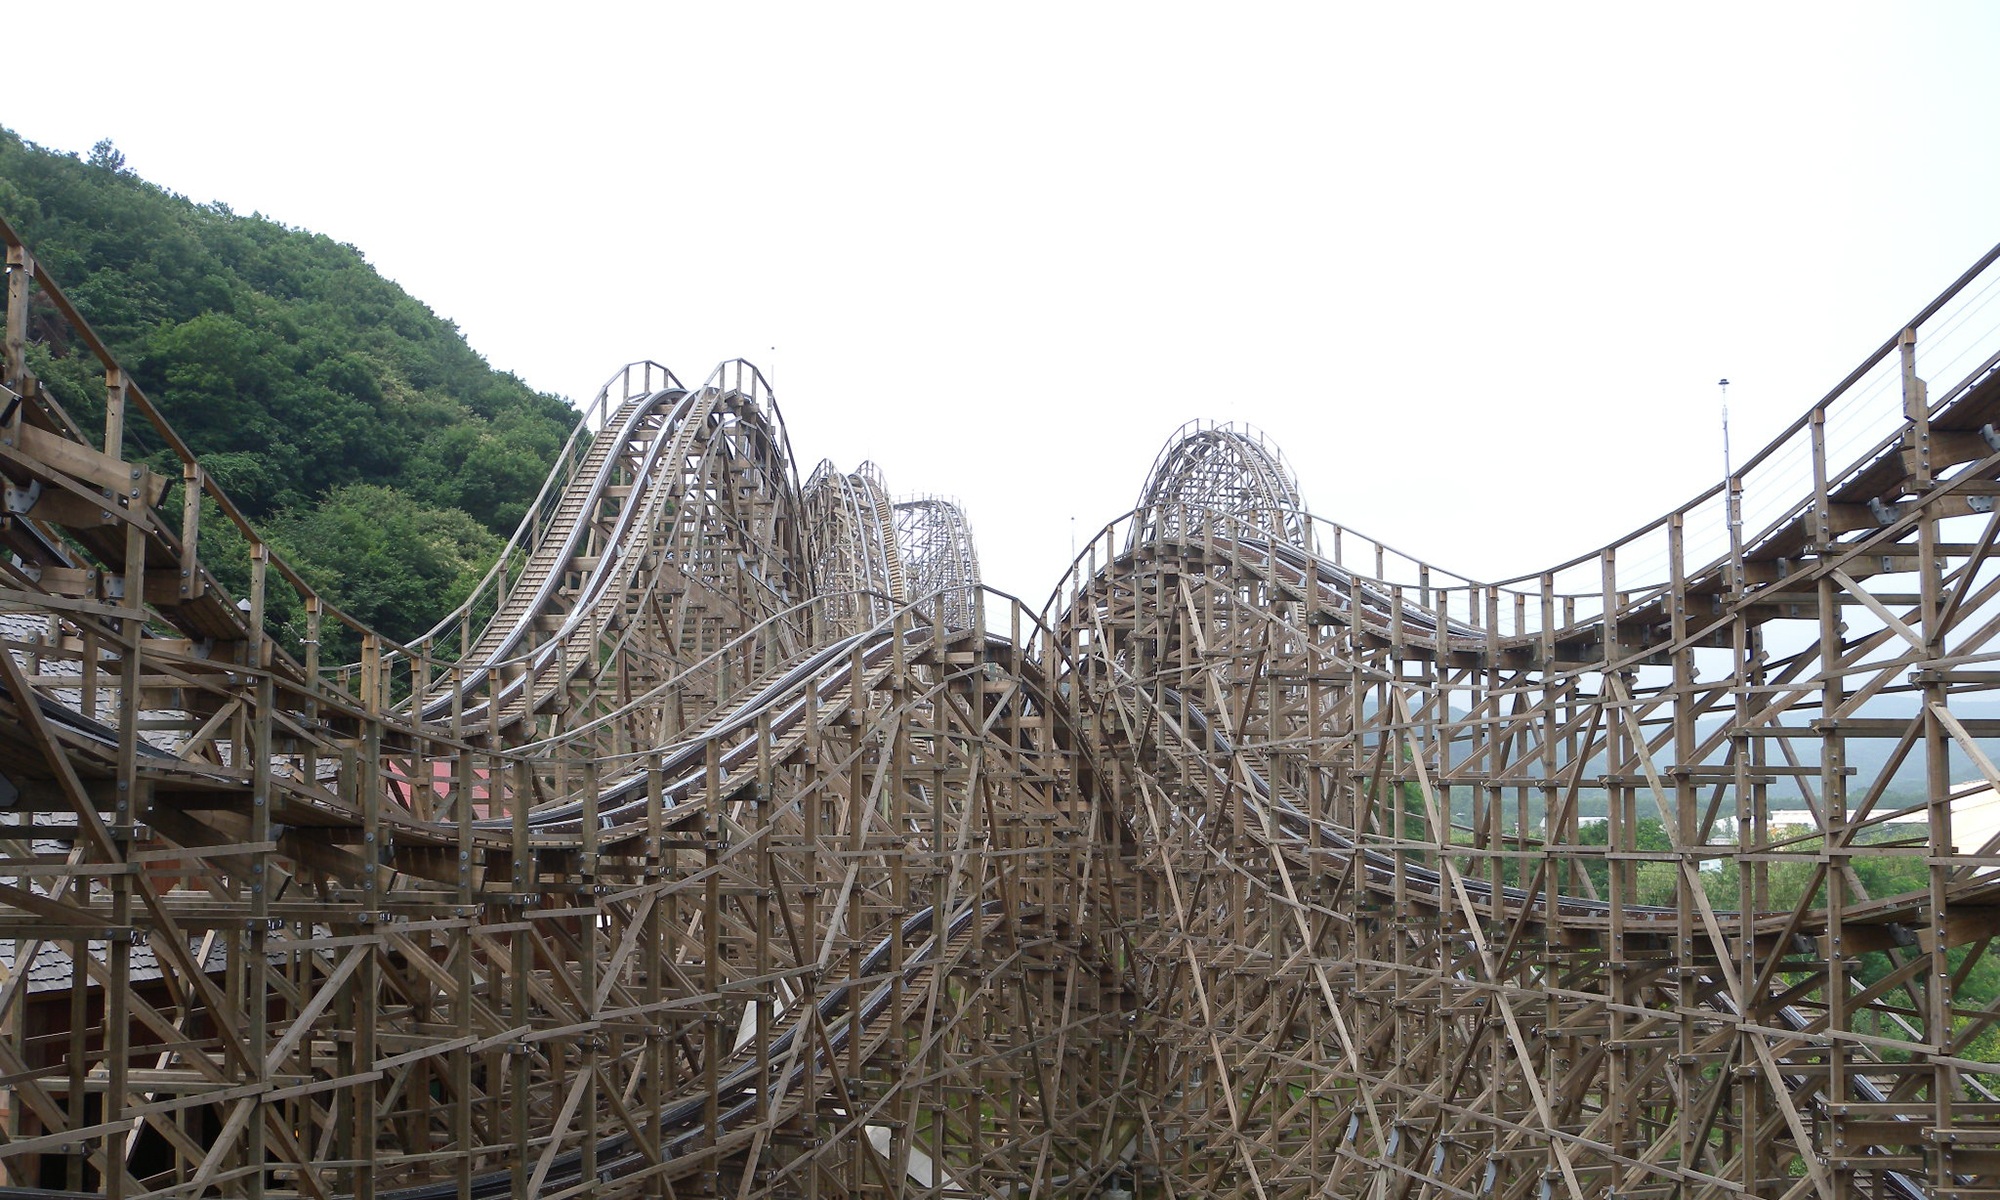 Close-up of the timber roller coaster